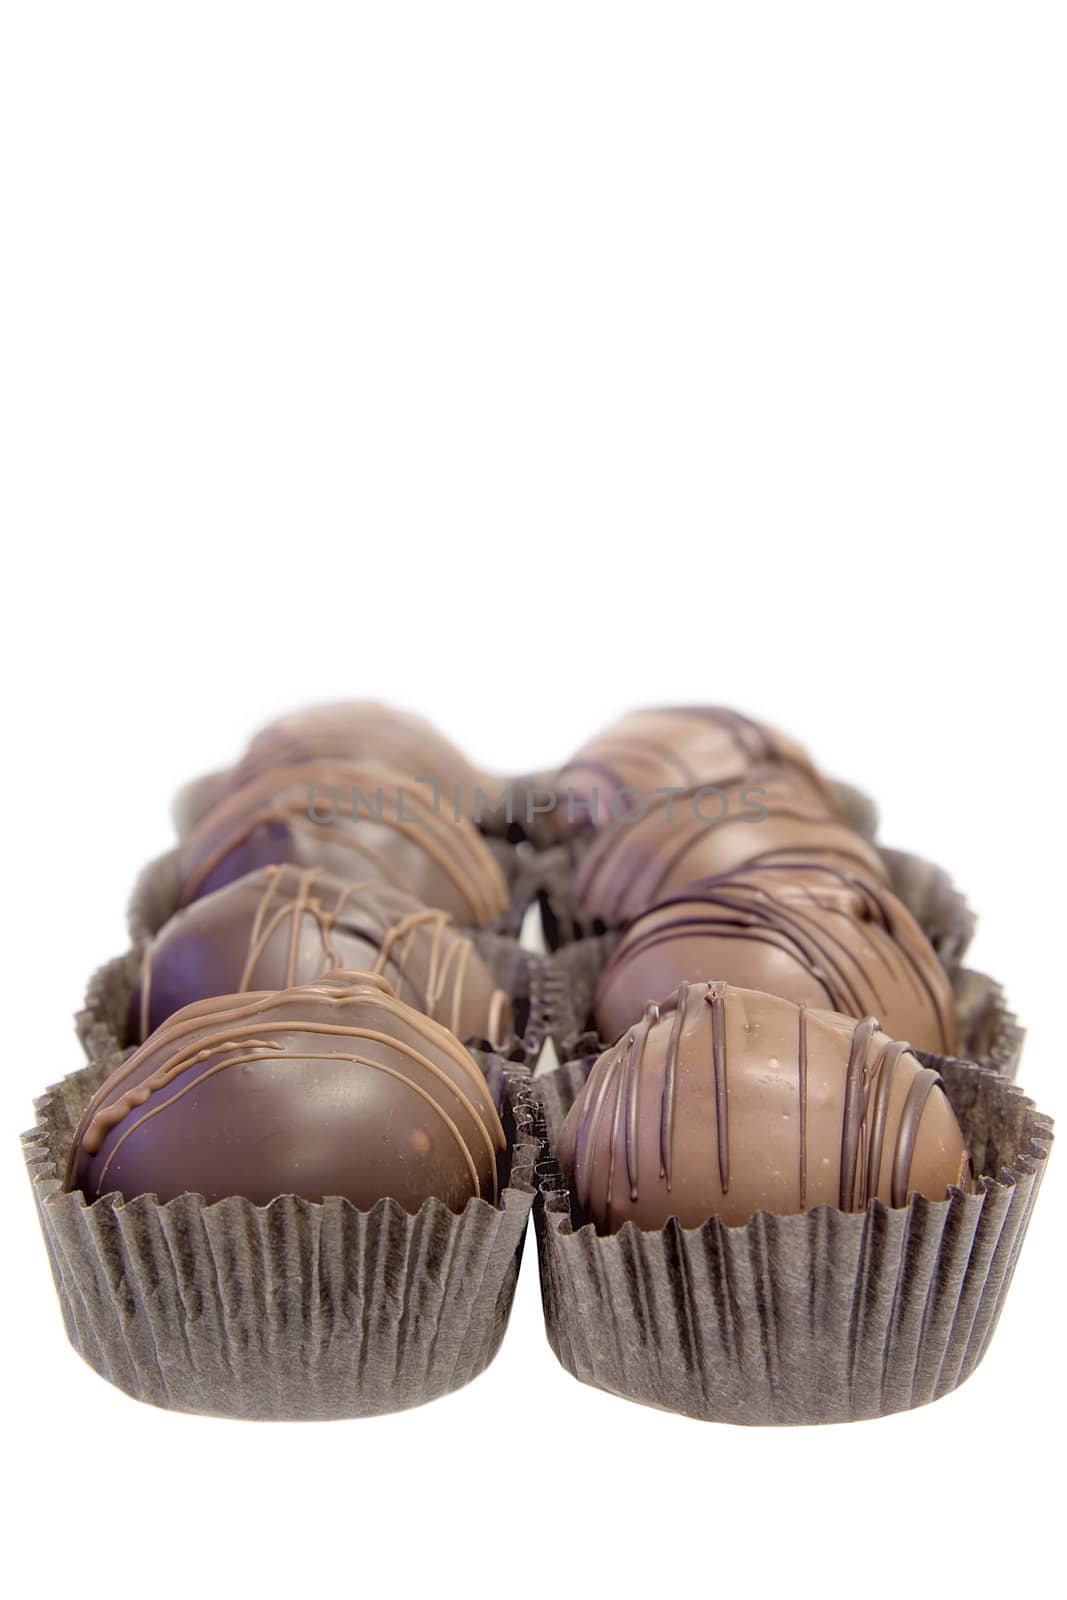 Two Rows of Dark and Milk Chocolate Truffles with Paper Base Liner Holders Isolated on White Background